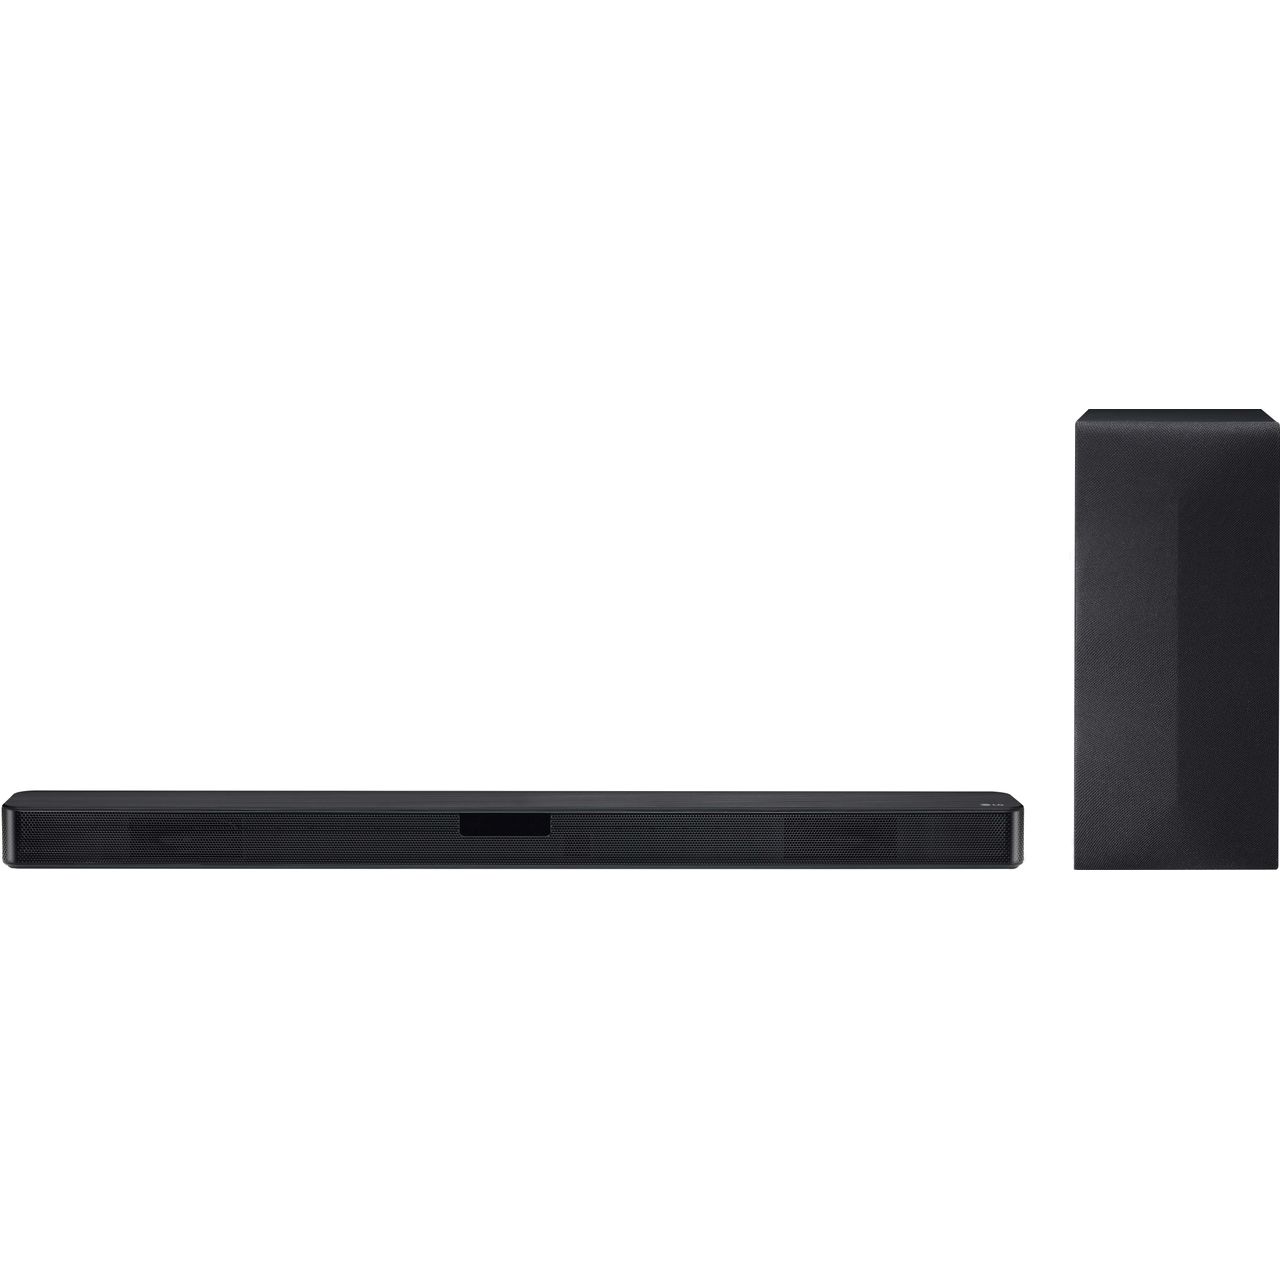 LG SN4 Bluetooth 2.1 Soundbar with Wireless Subwoofer Review